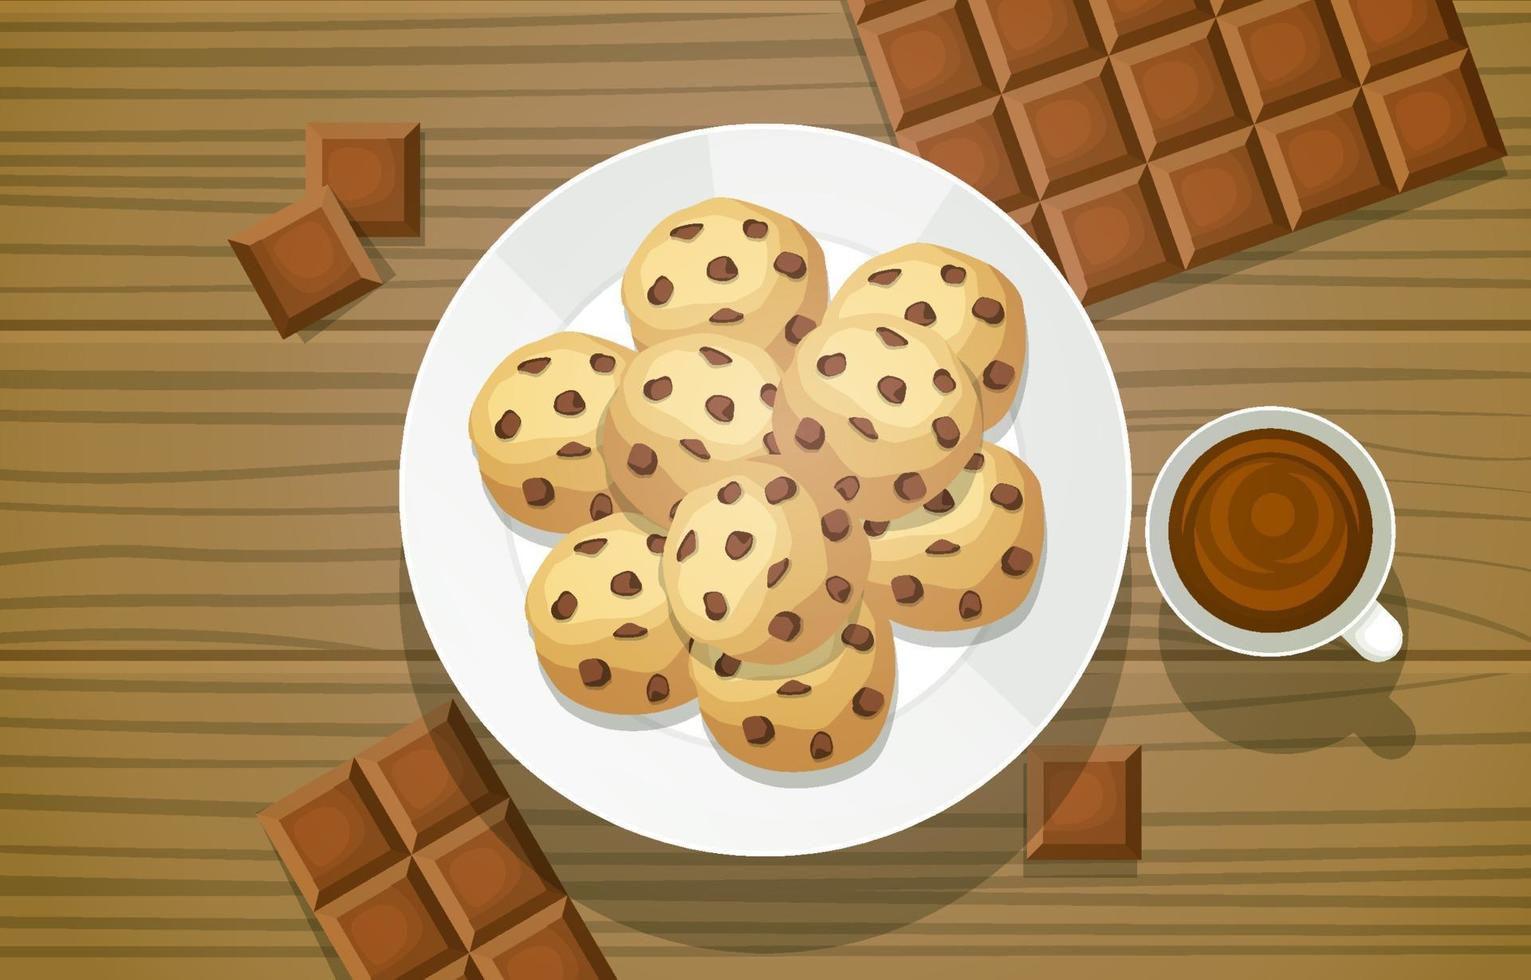 Chocolate Chip Cookiess on Plate with Chocolate Squares on Wooden Table vector